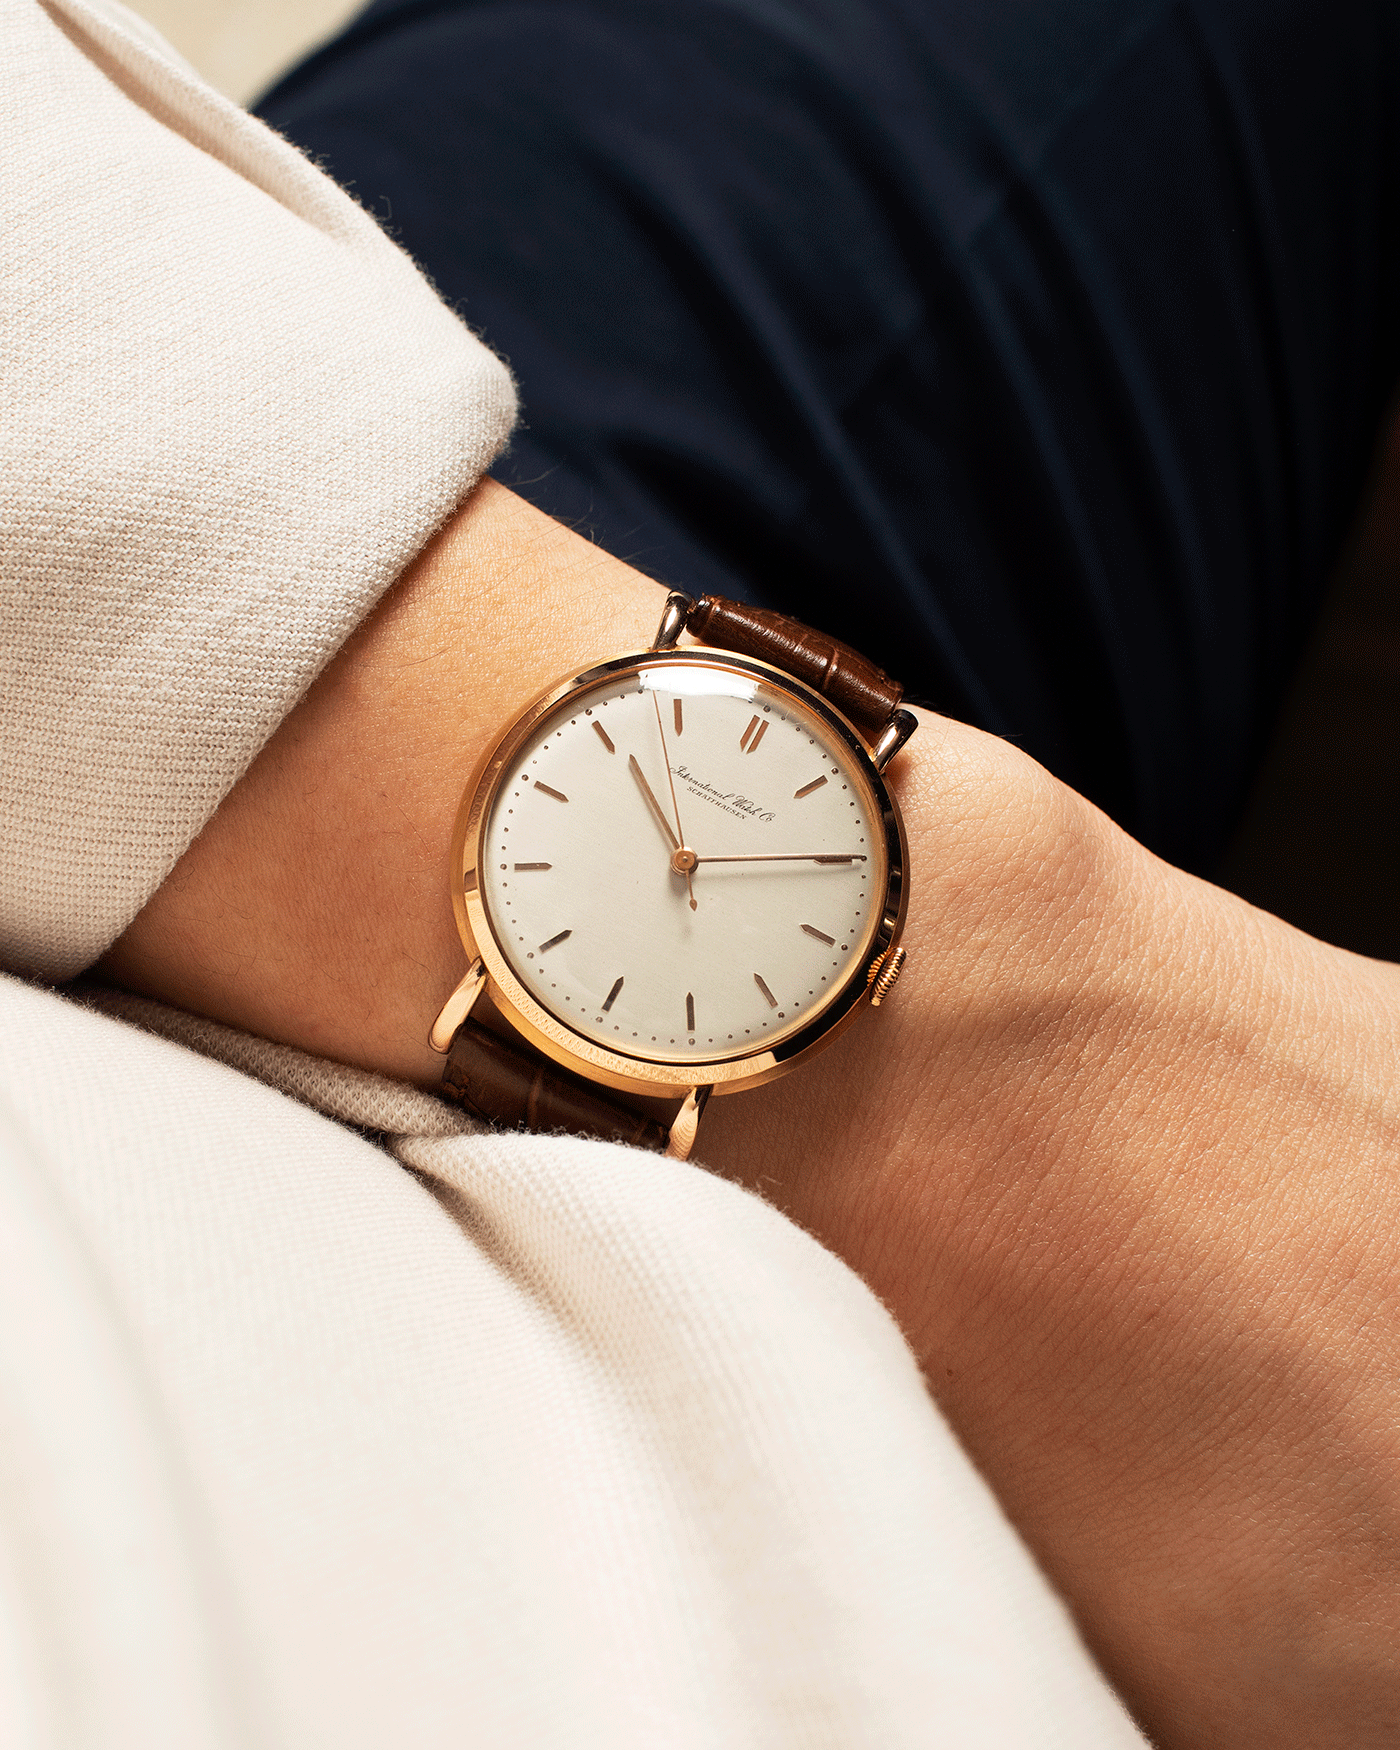 Brand: IWC Year: 1949 Serial Number: 1193964 Material: 18k Rose Gold Movement: In-house Cal. 89 Case Diameter: 36mm Lug Width: 18mm Bracelet/Strap: Brown Textured Leather Strap with Gold Plated Buckle